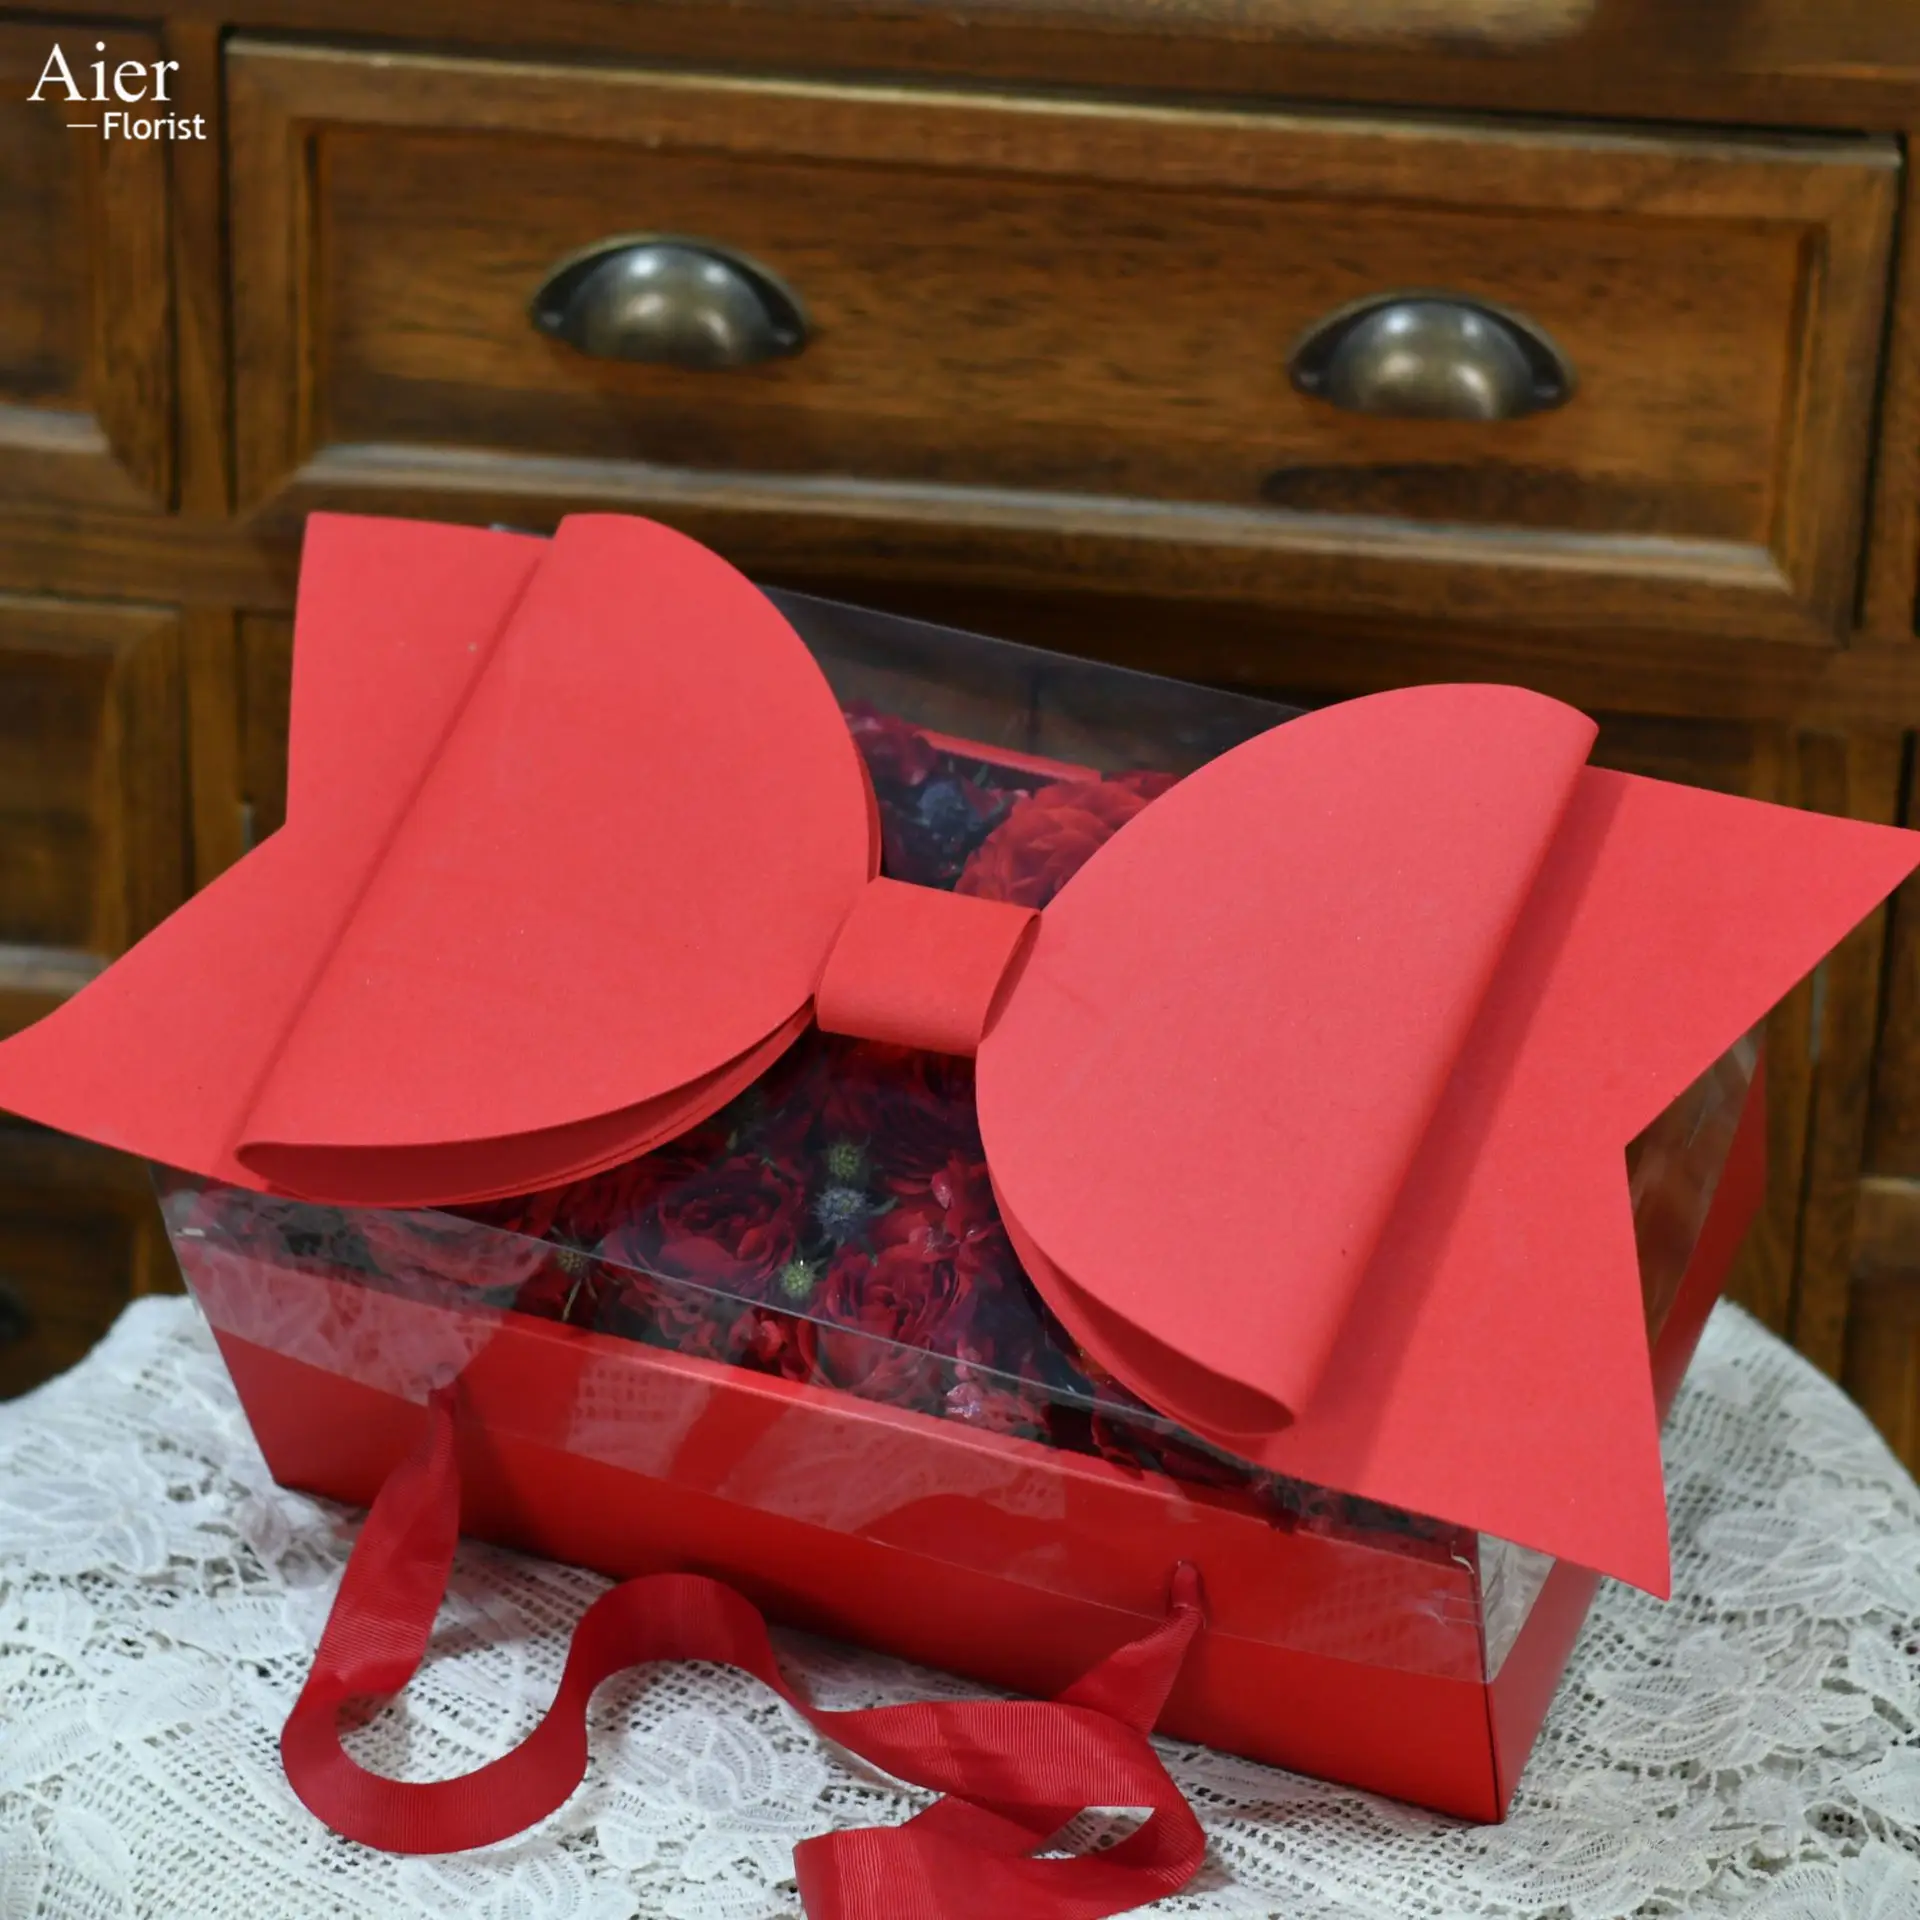 Aierflorist Flower folding Gift Boxes Rose butterfly Packaging Gift Box Luxury Bow PVC Flower Box for Mother's Day